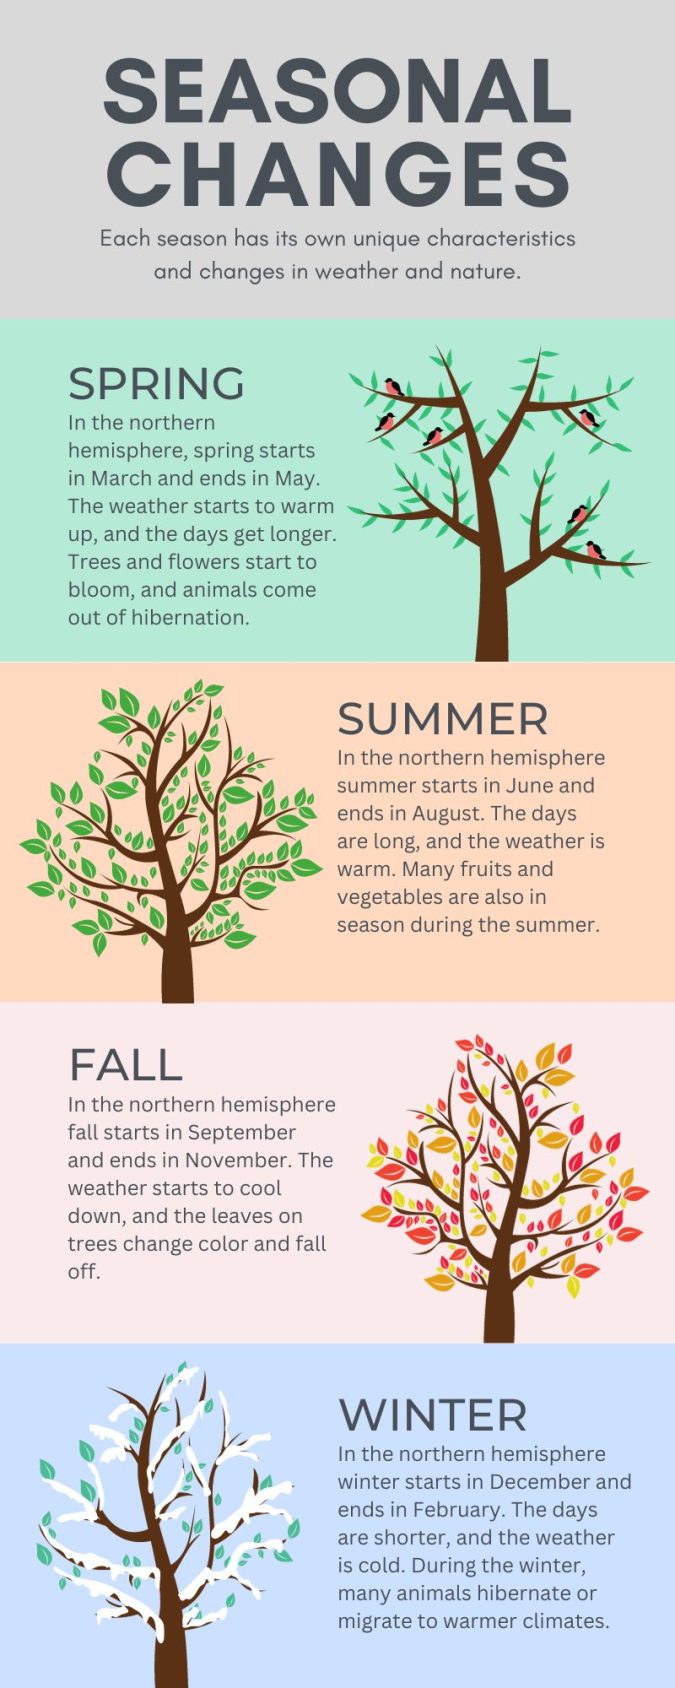 What are the characteristics of the seasons?